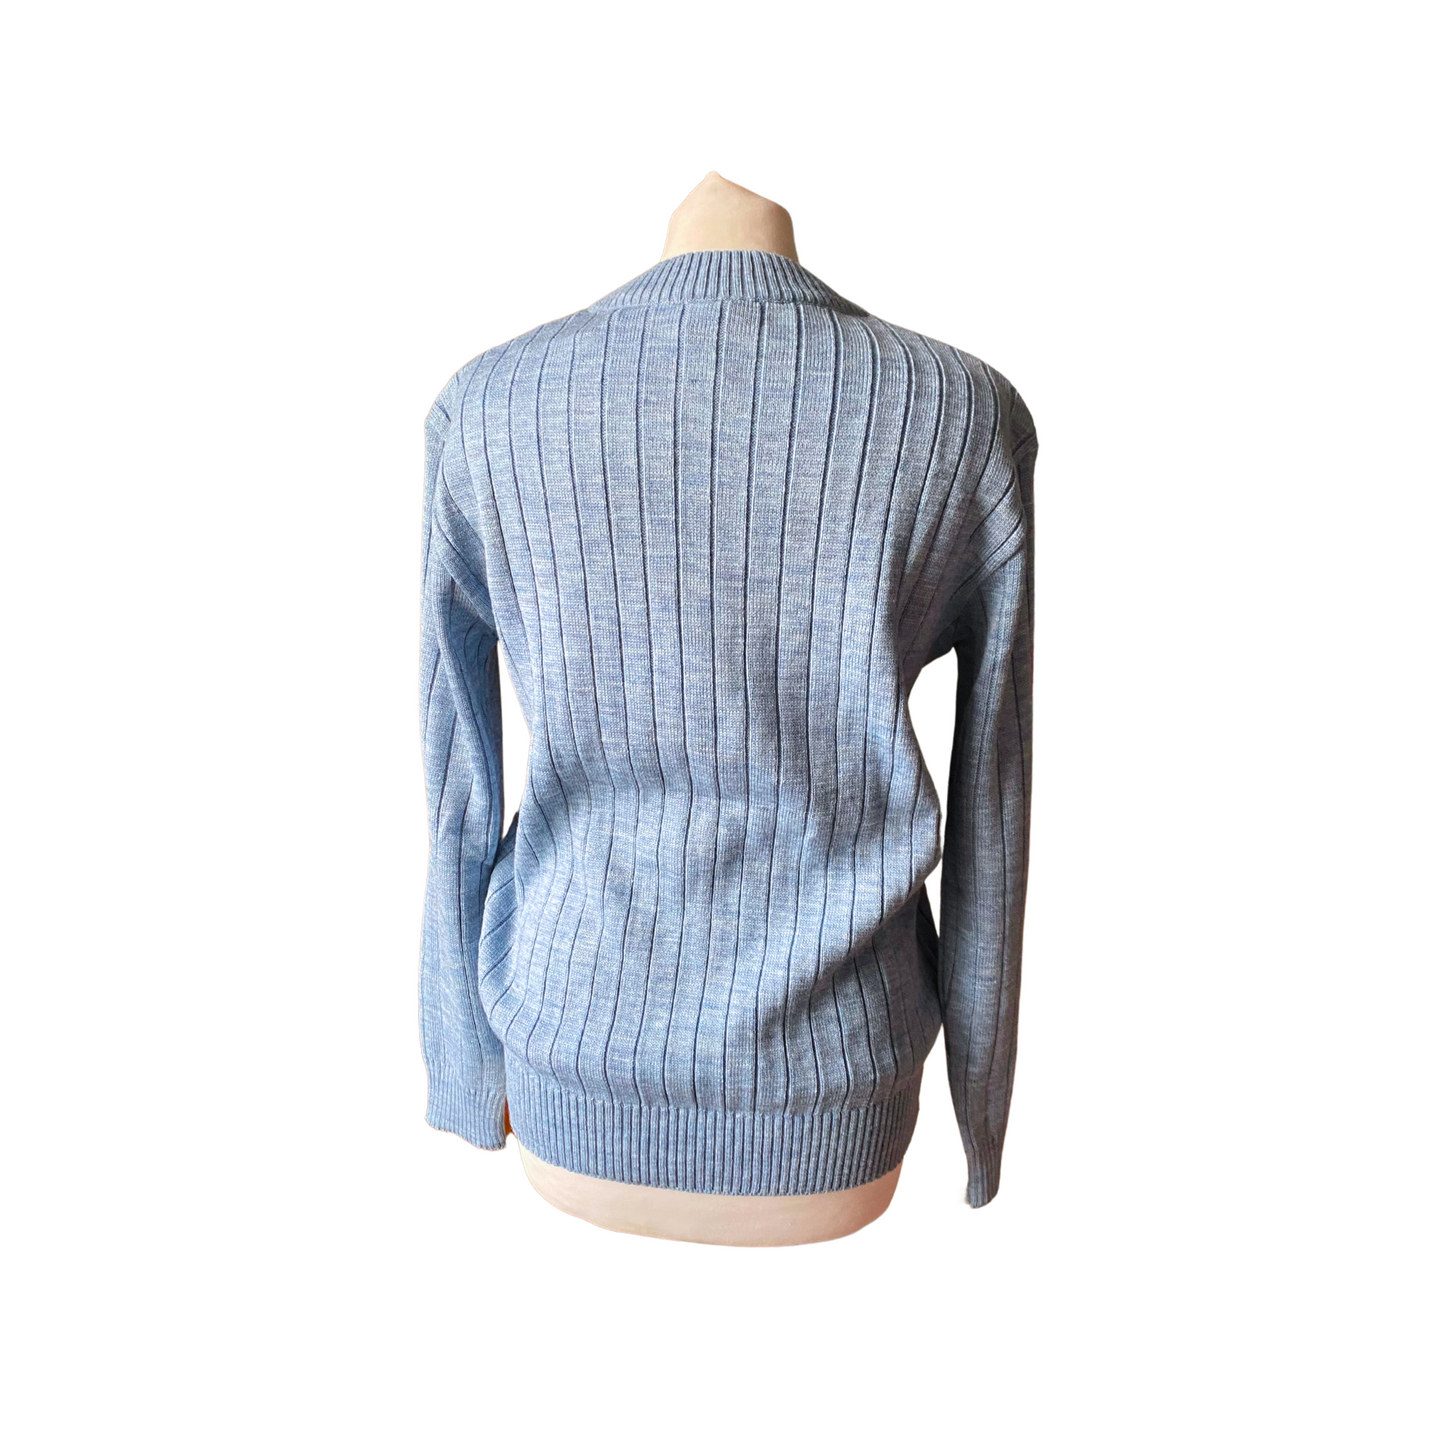 Soft and comfortable acrylic blue ribbed jumper - vintage design